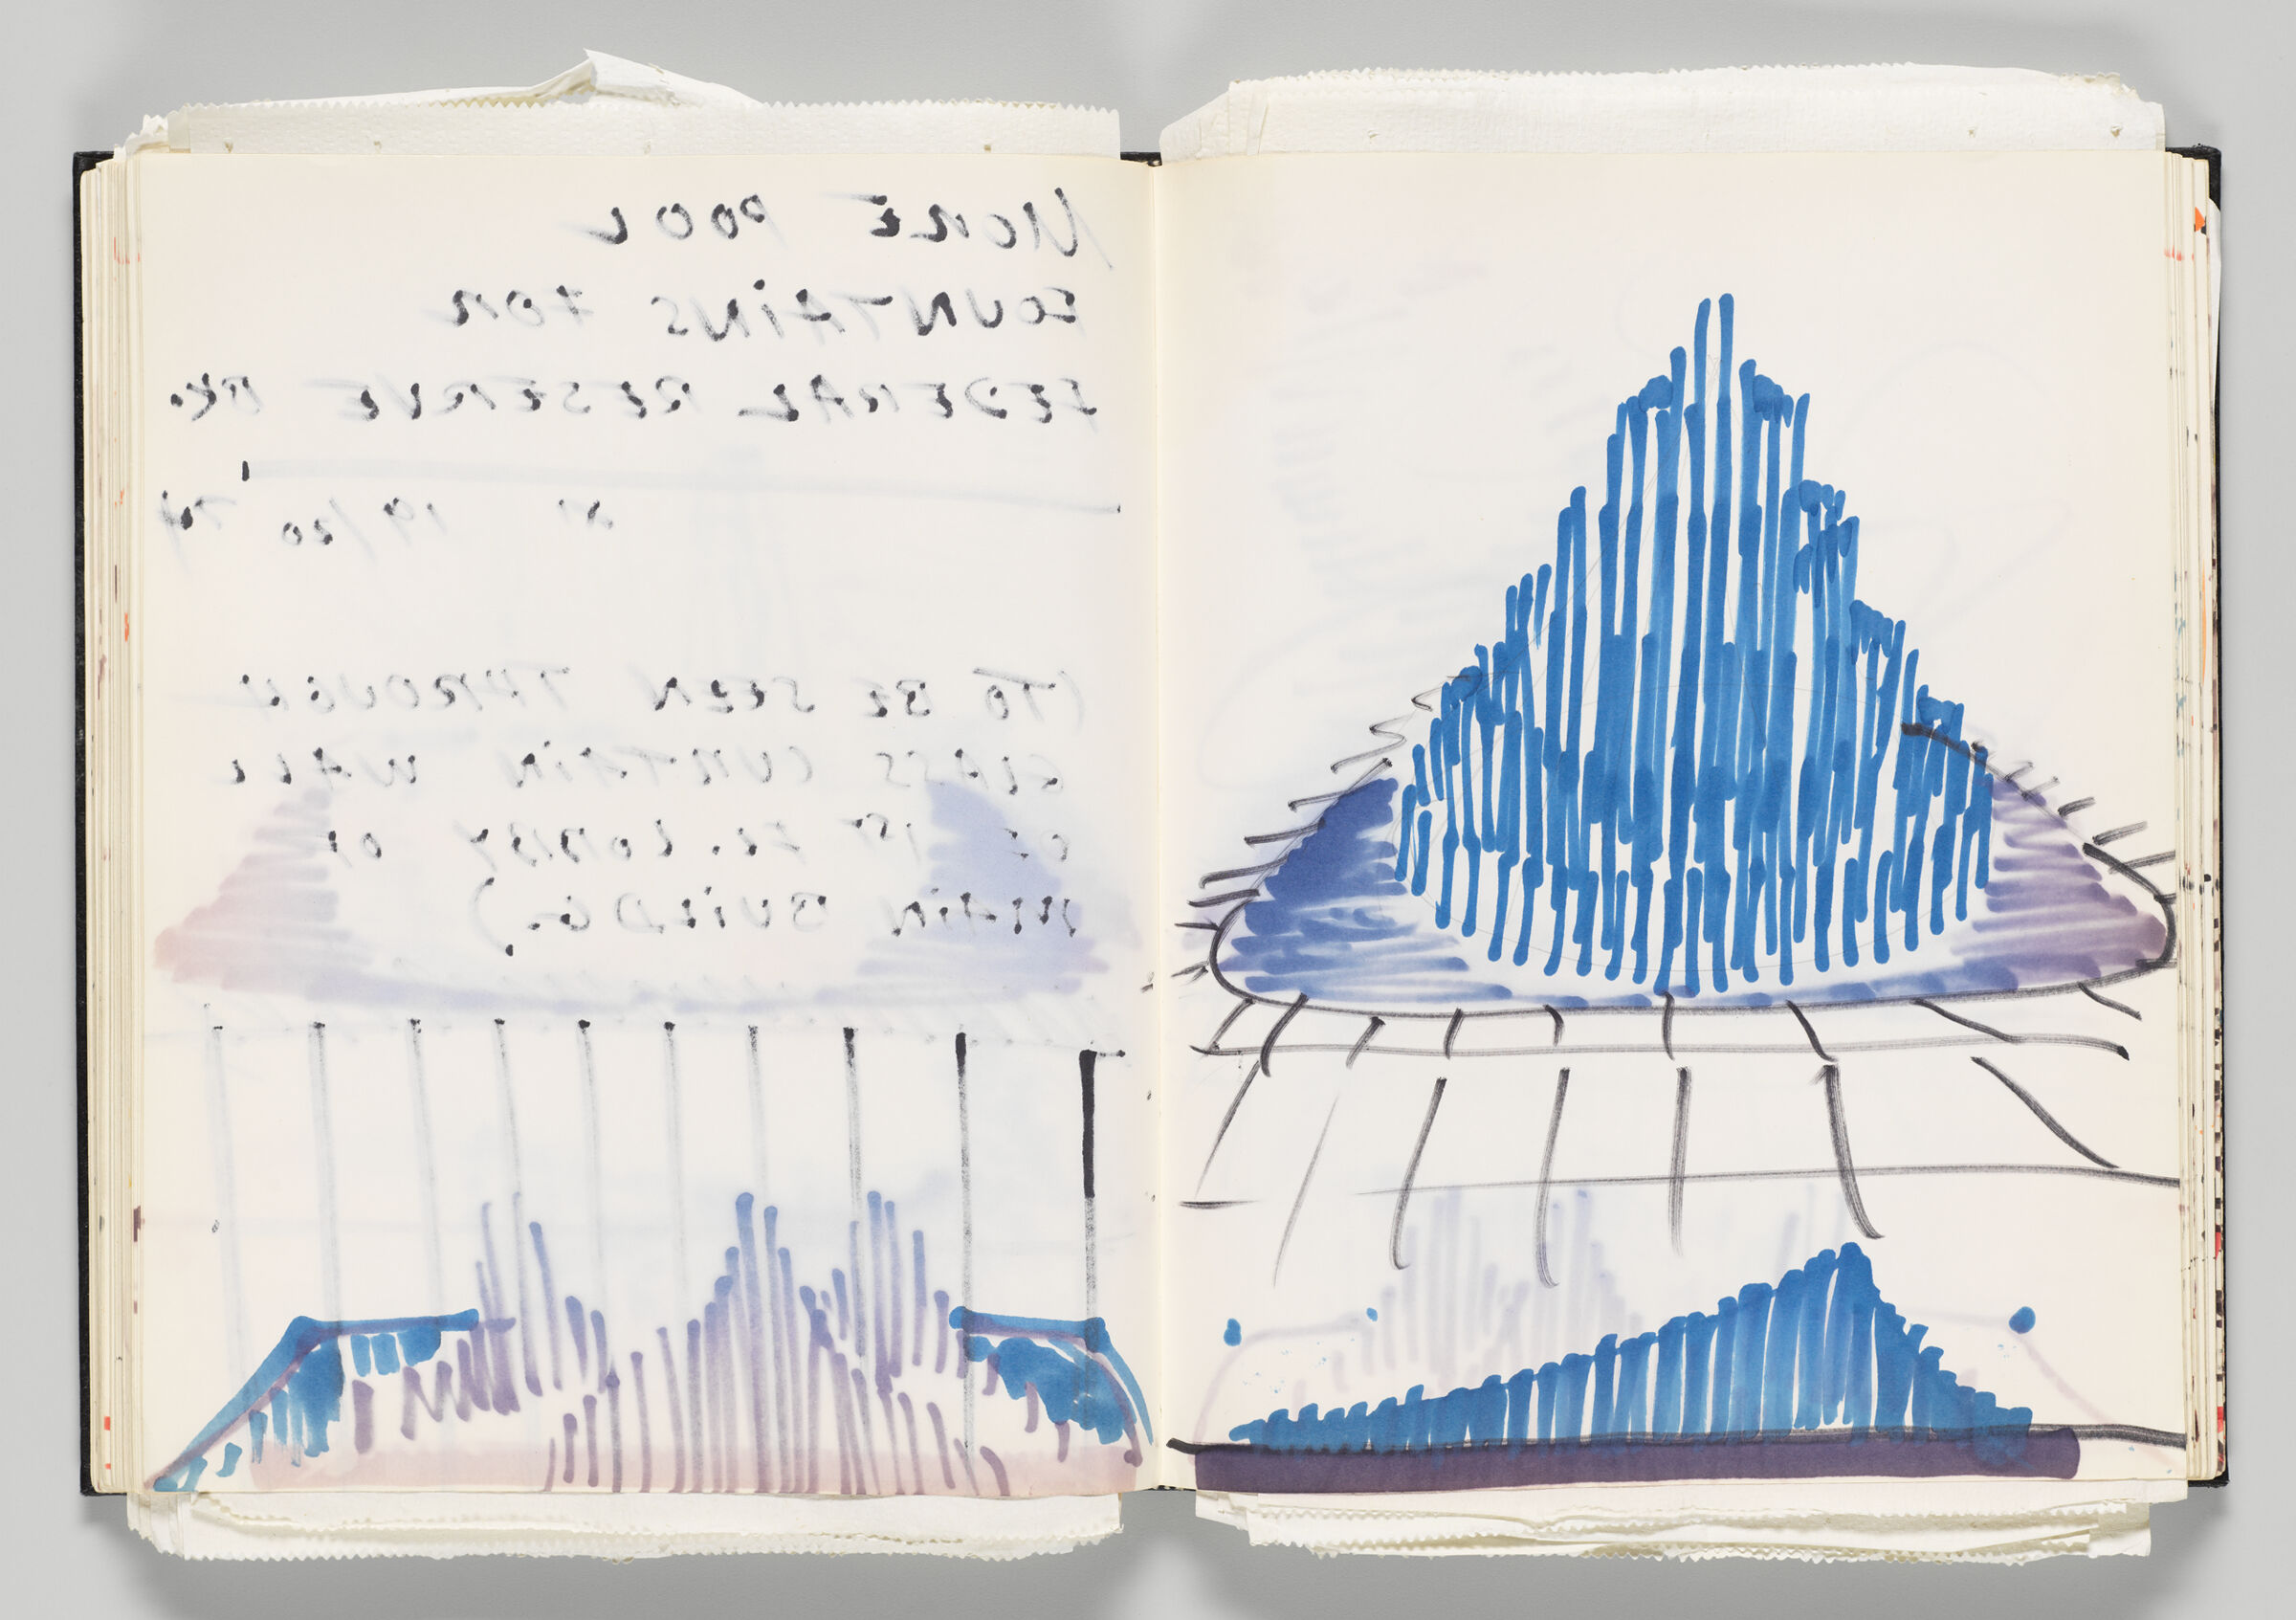 Untitled (Bleed-Through Of Previous Page, Left Page); Untitled (Pool Fountain Design, Right Page)